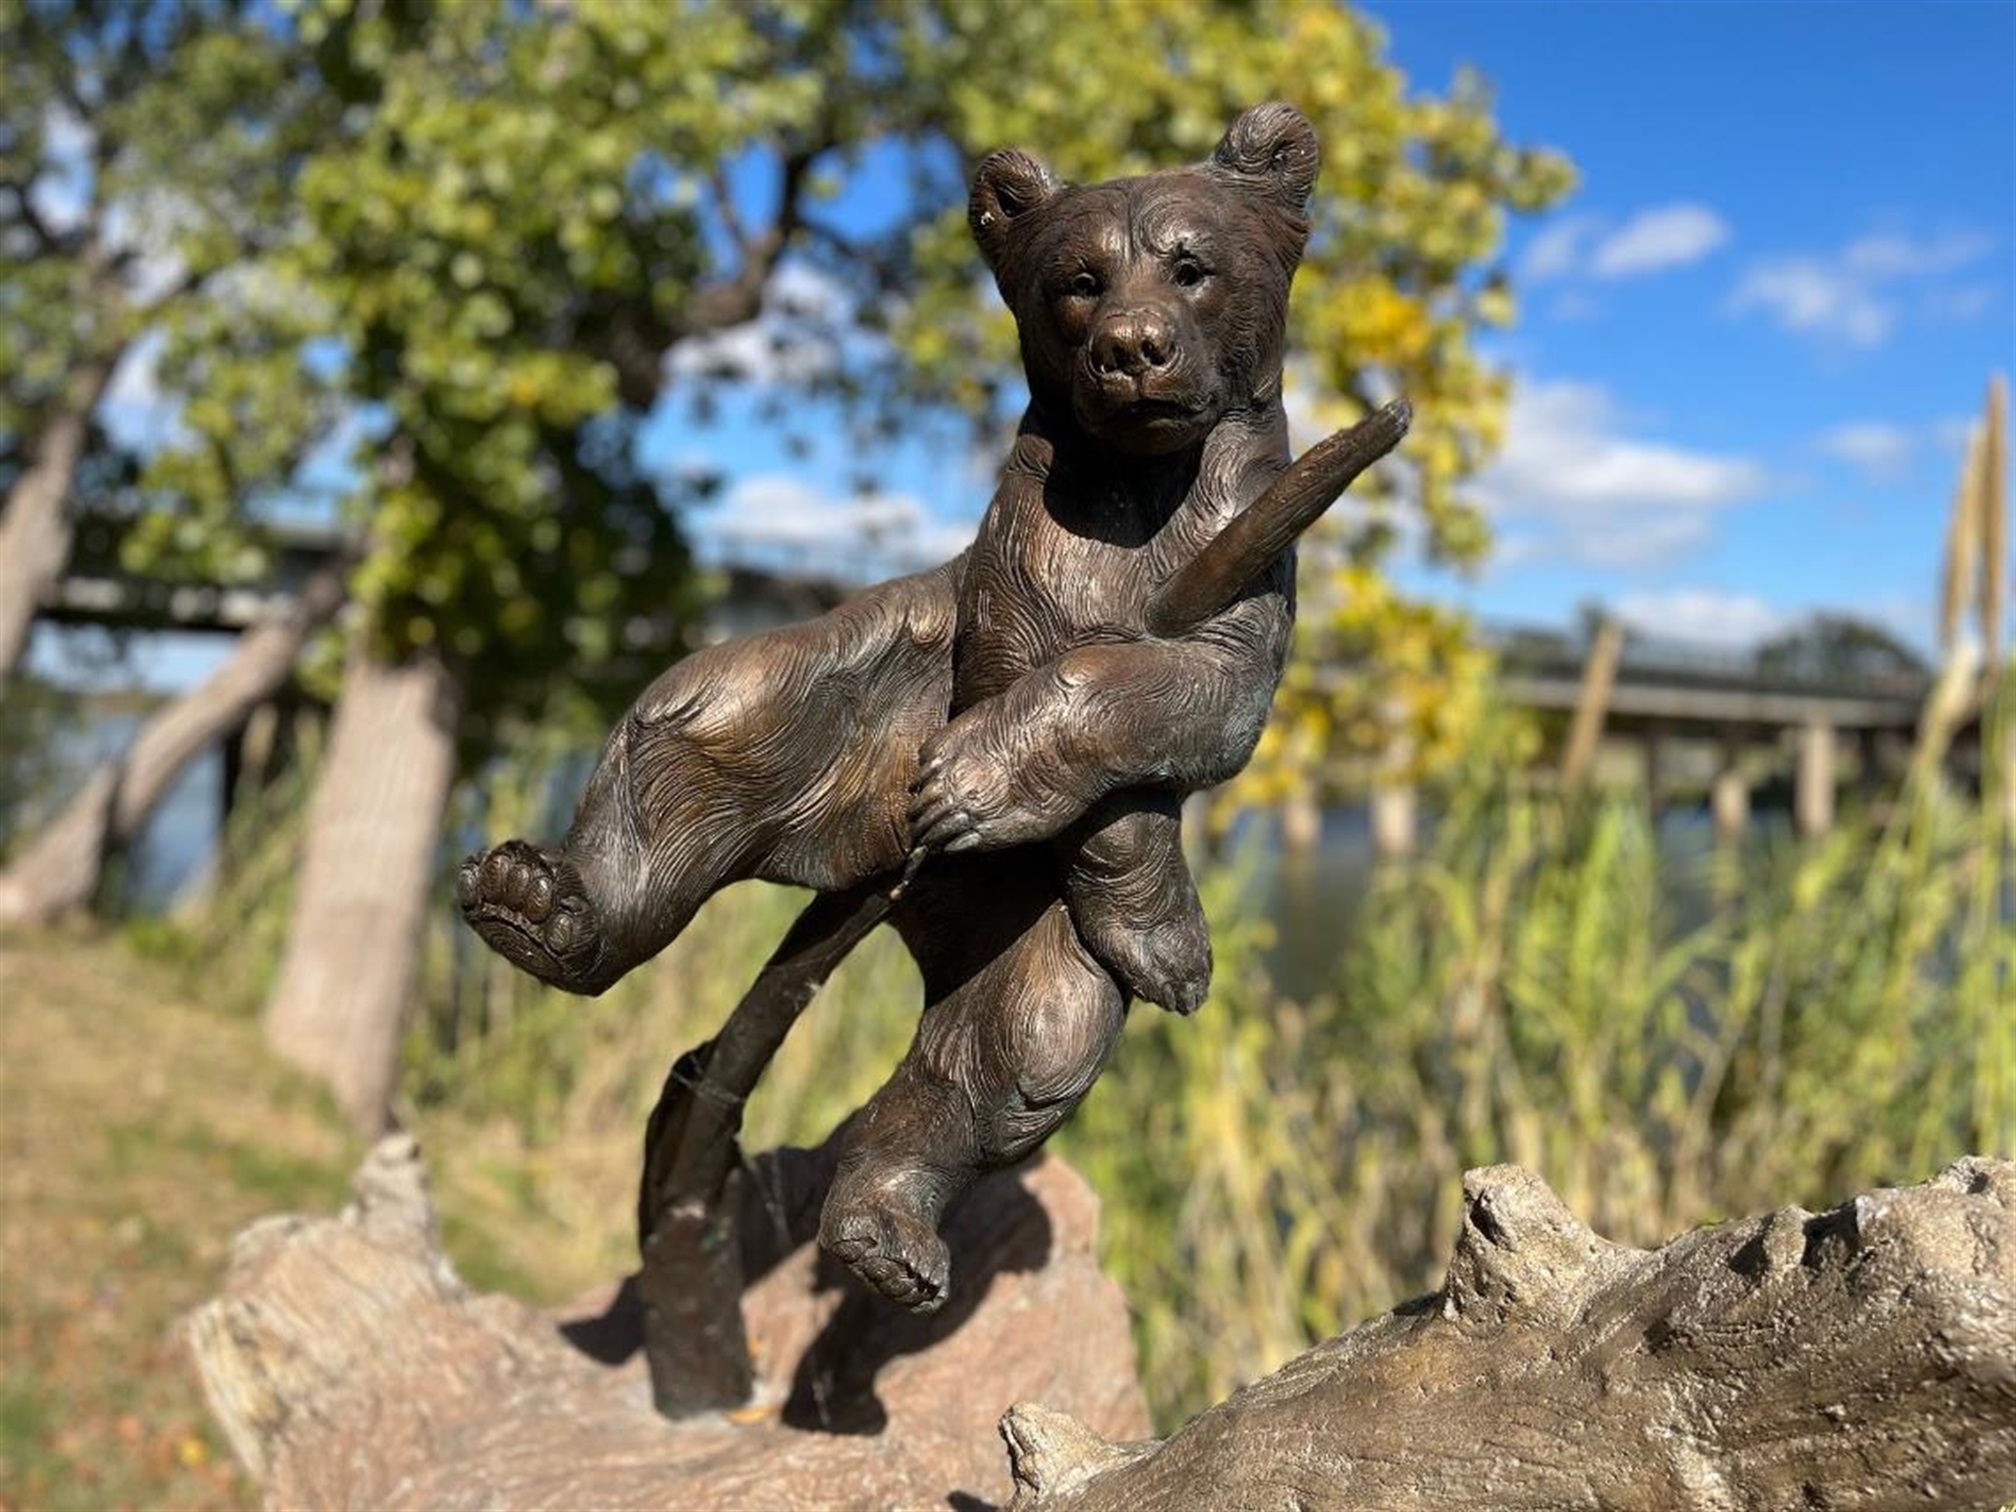 Photo of bear sculpture with the Brazos River in the background.